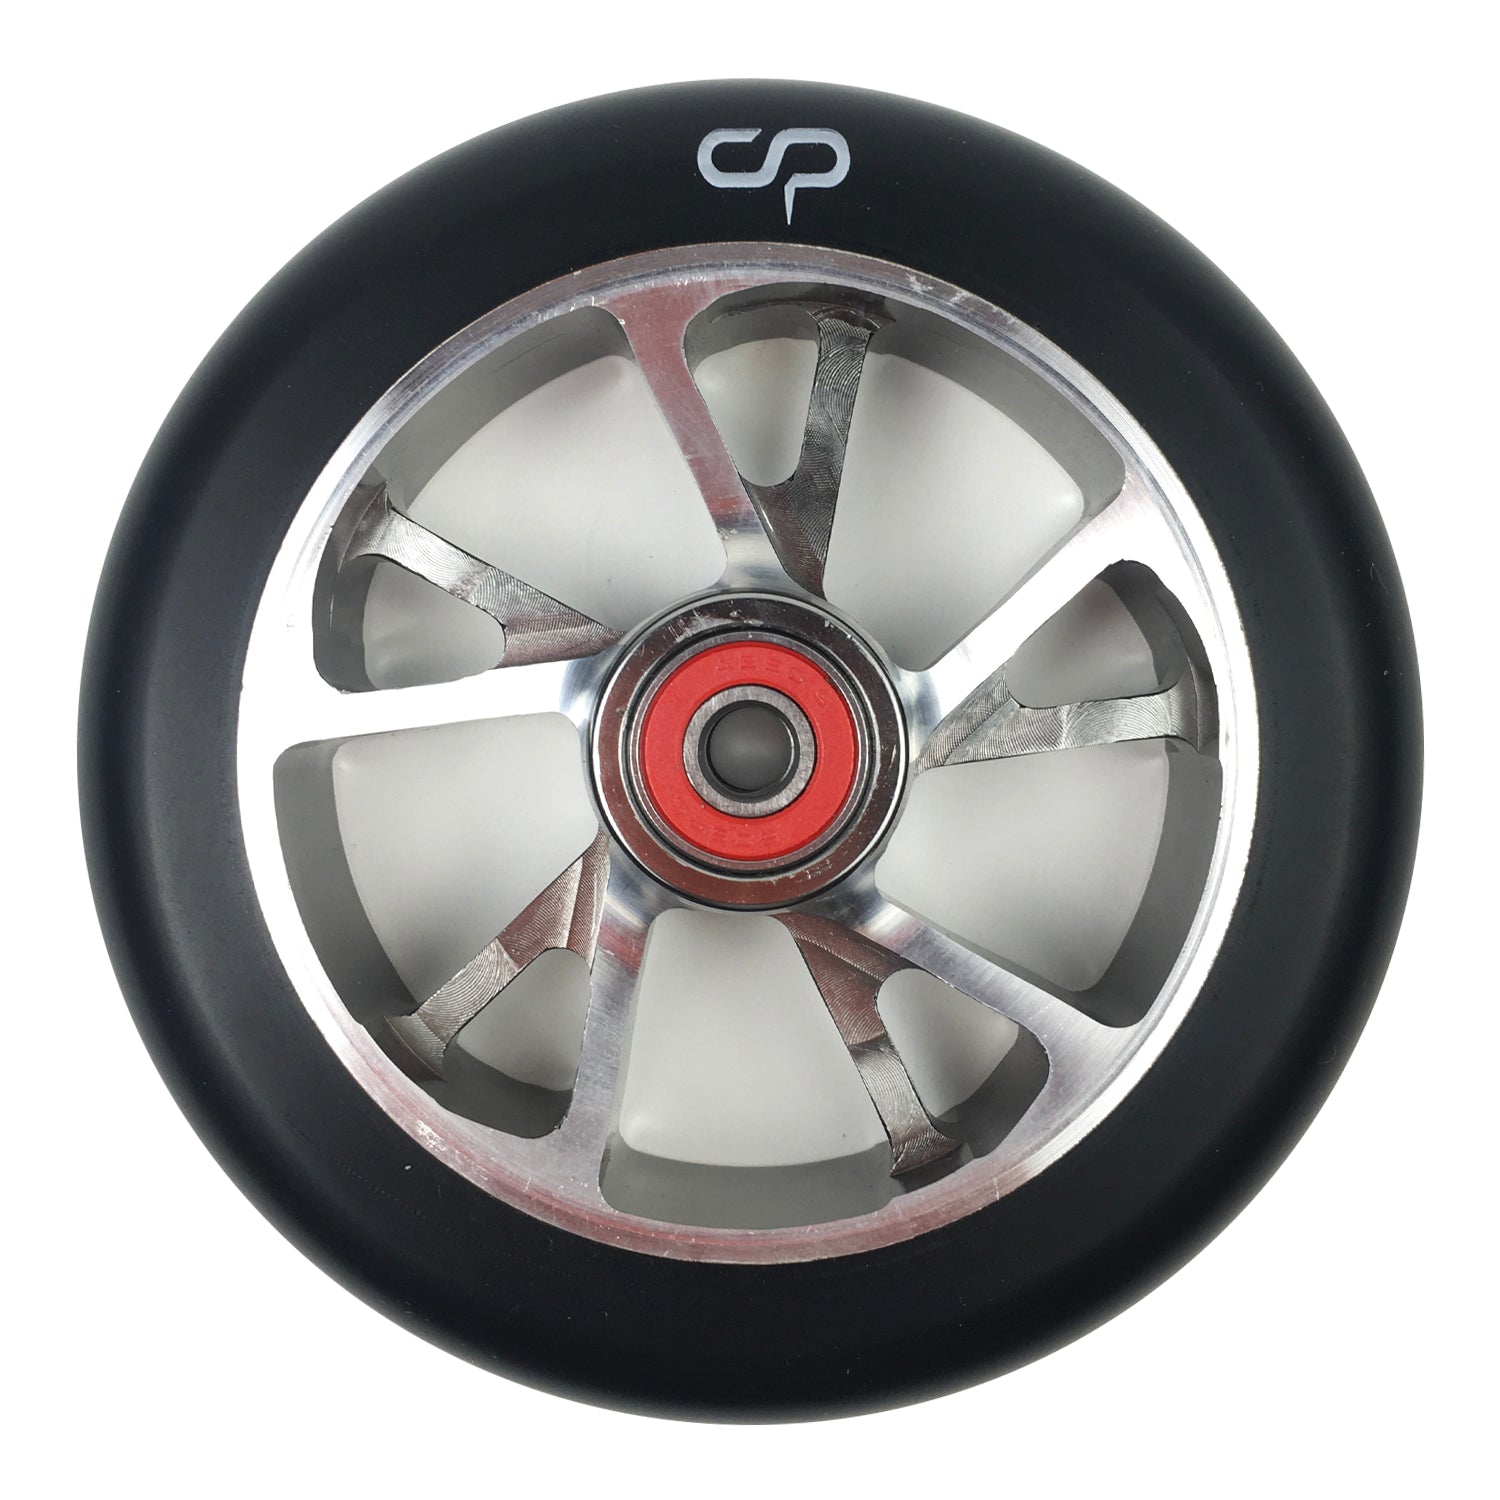 CRISP F1 Forged Wheel - 120mm - Black / Silver (Sold as a single item) - Prime Delux Store